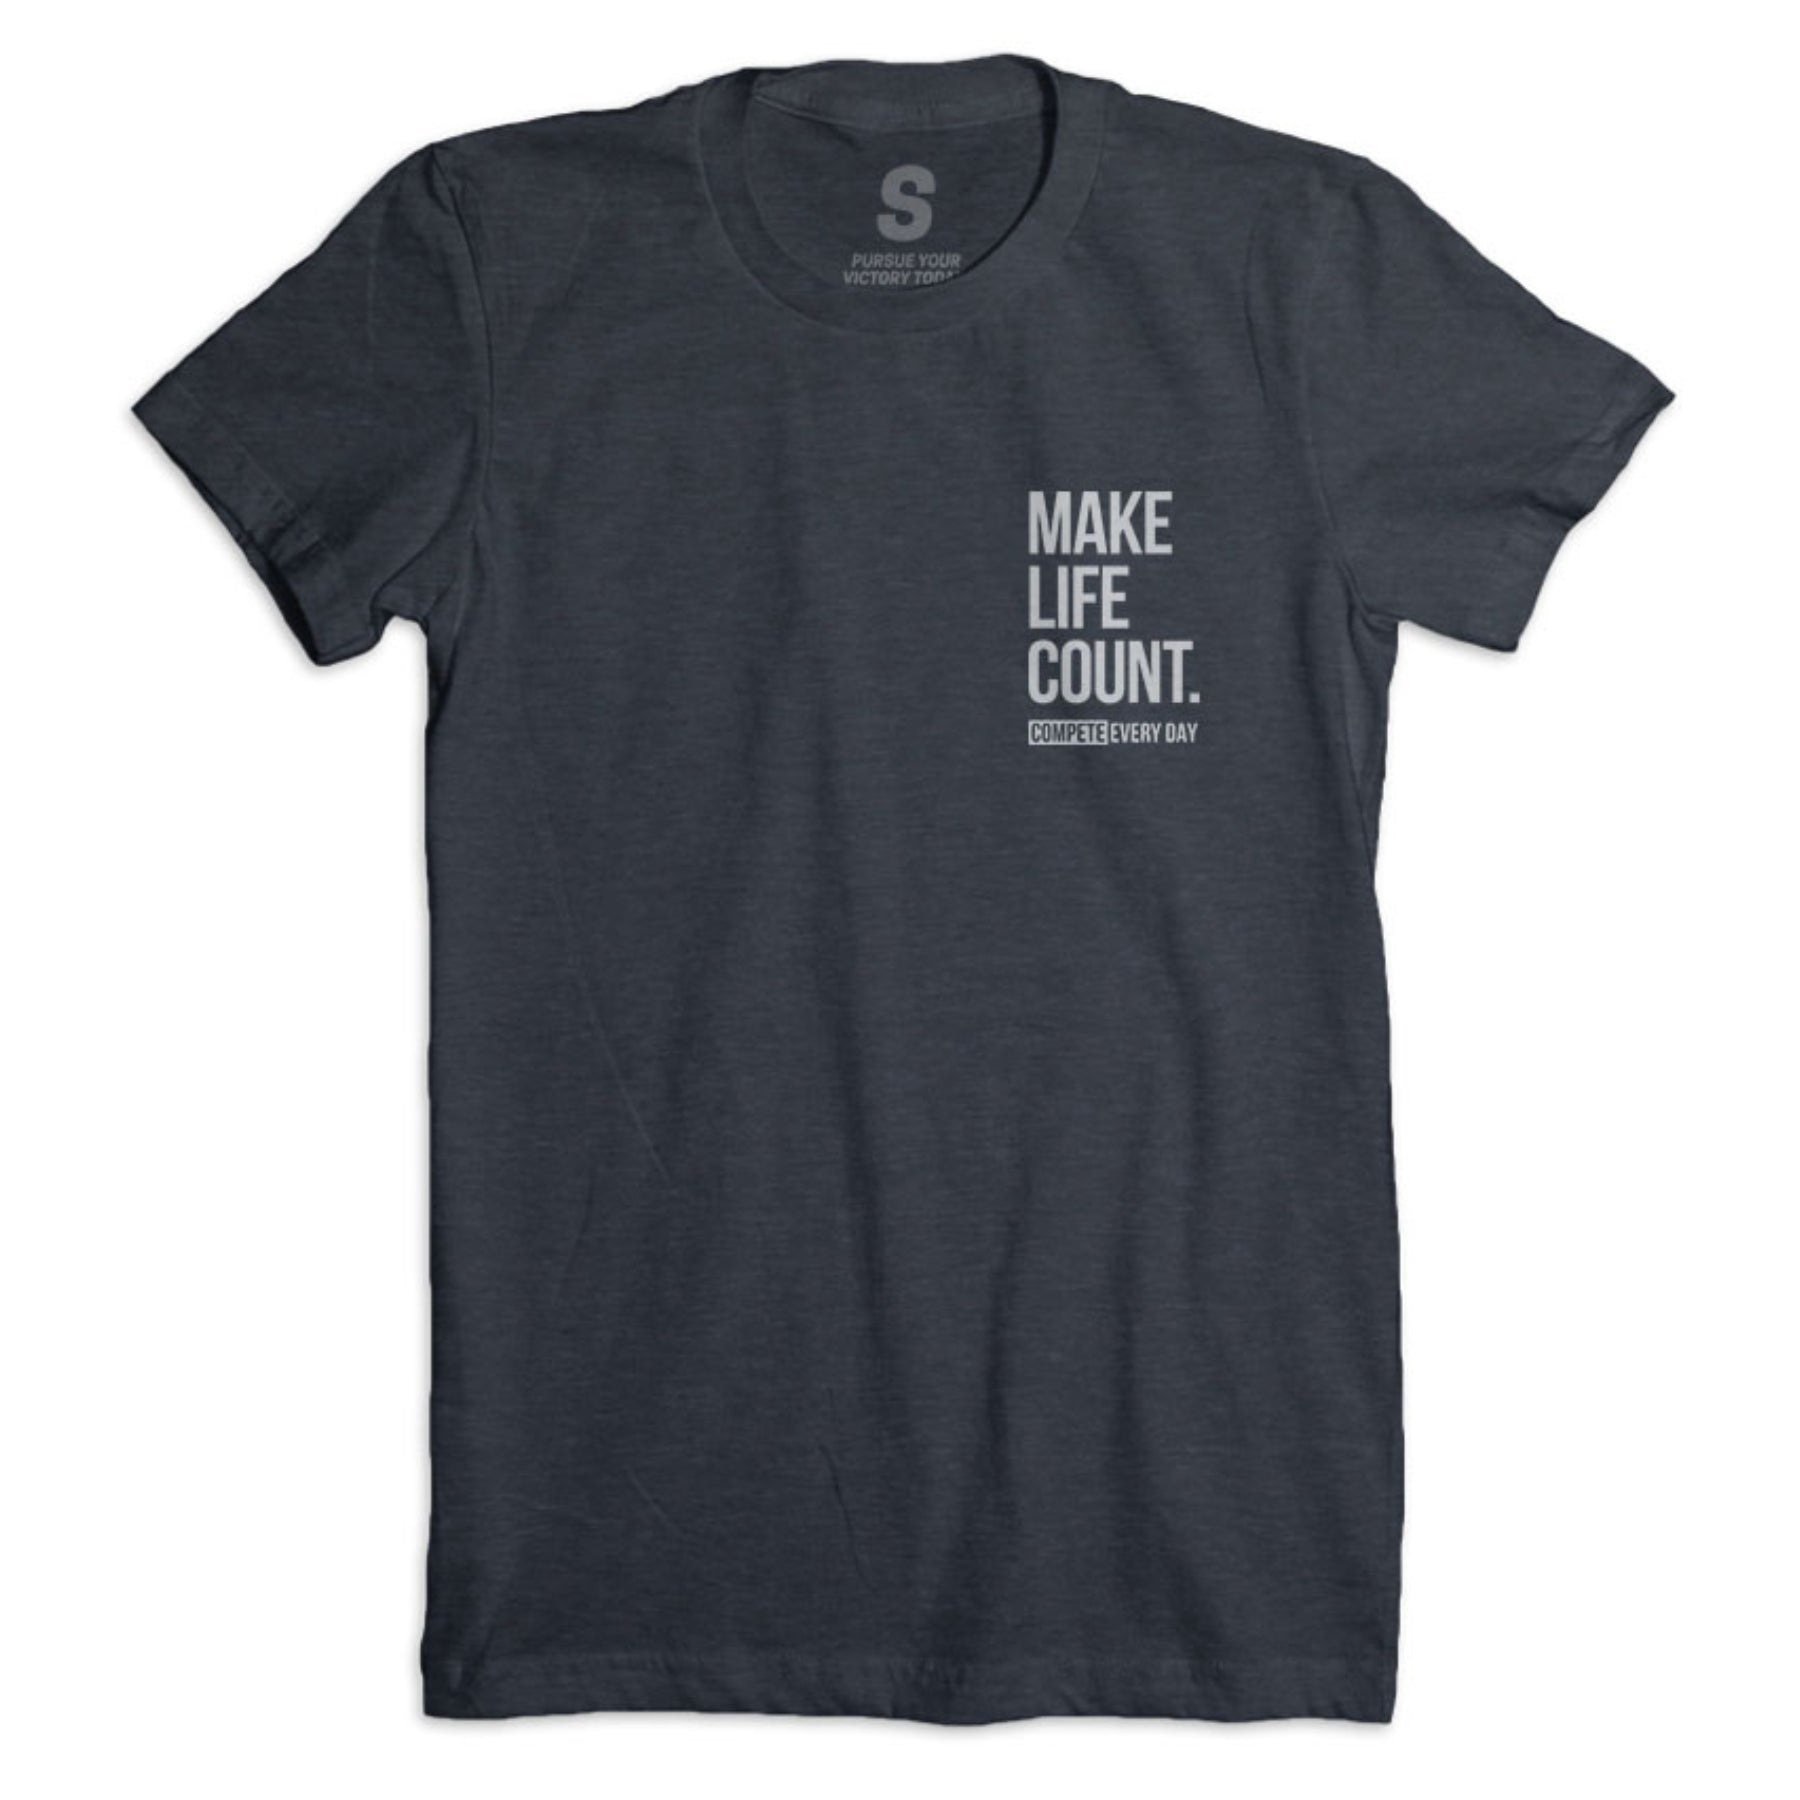 (PREORDER) Make Life Count (Womens)